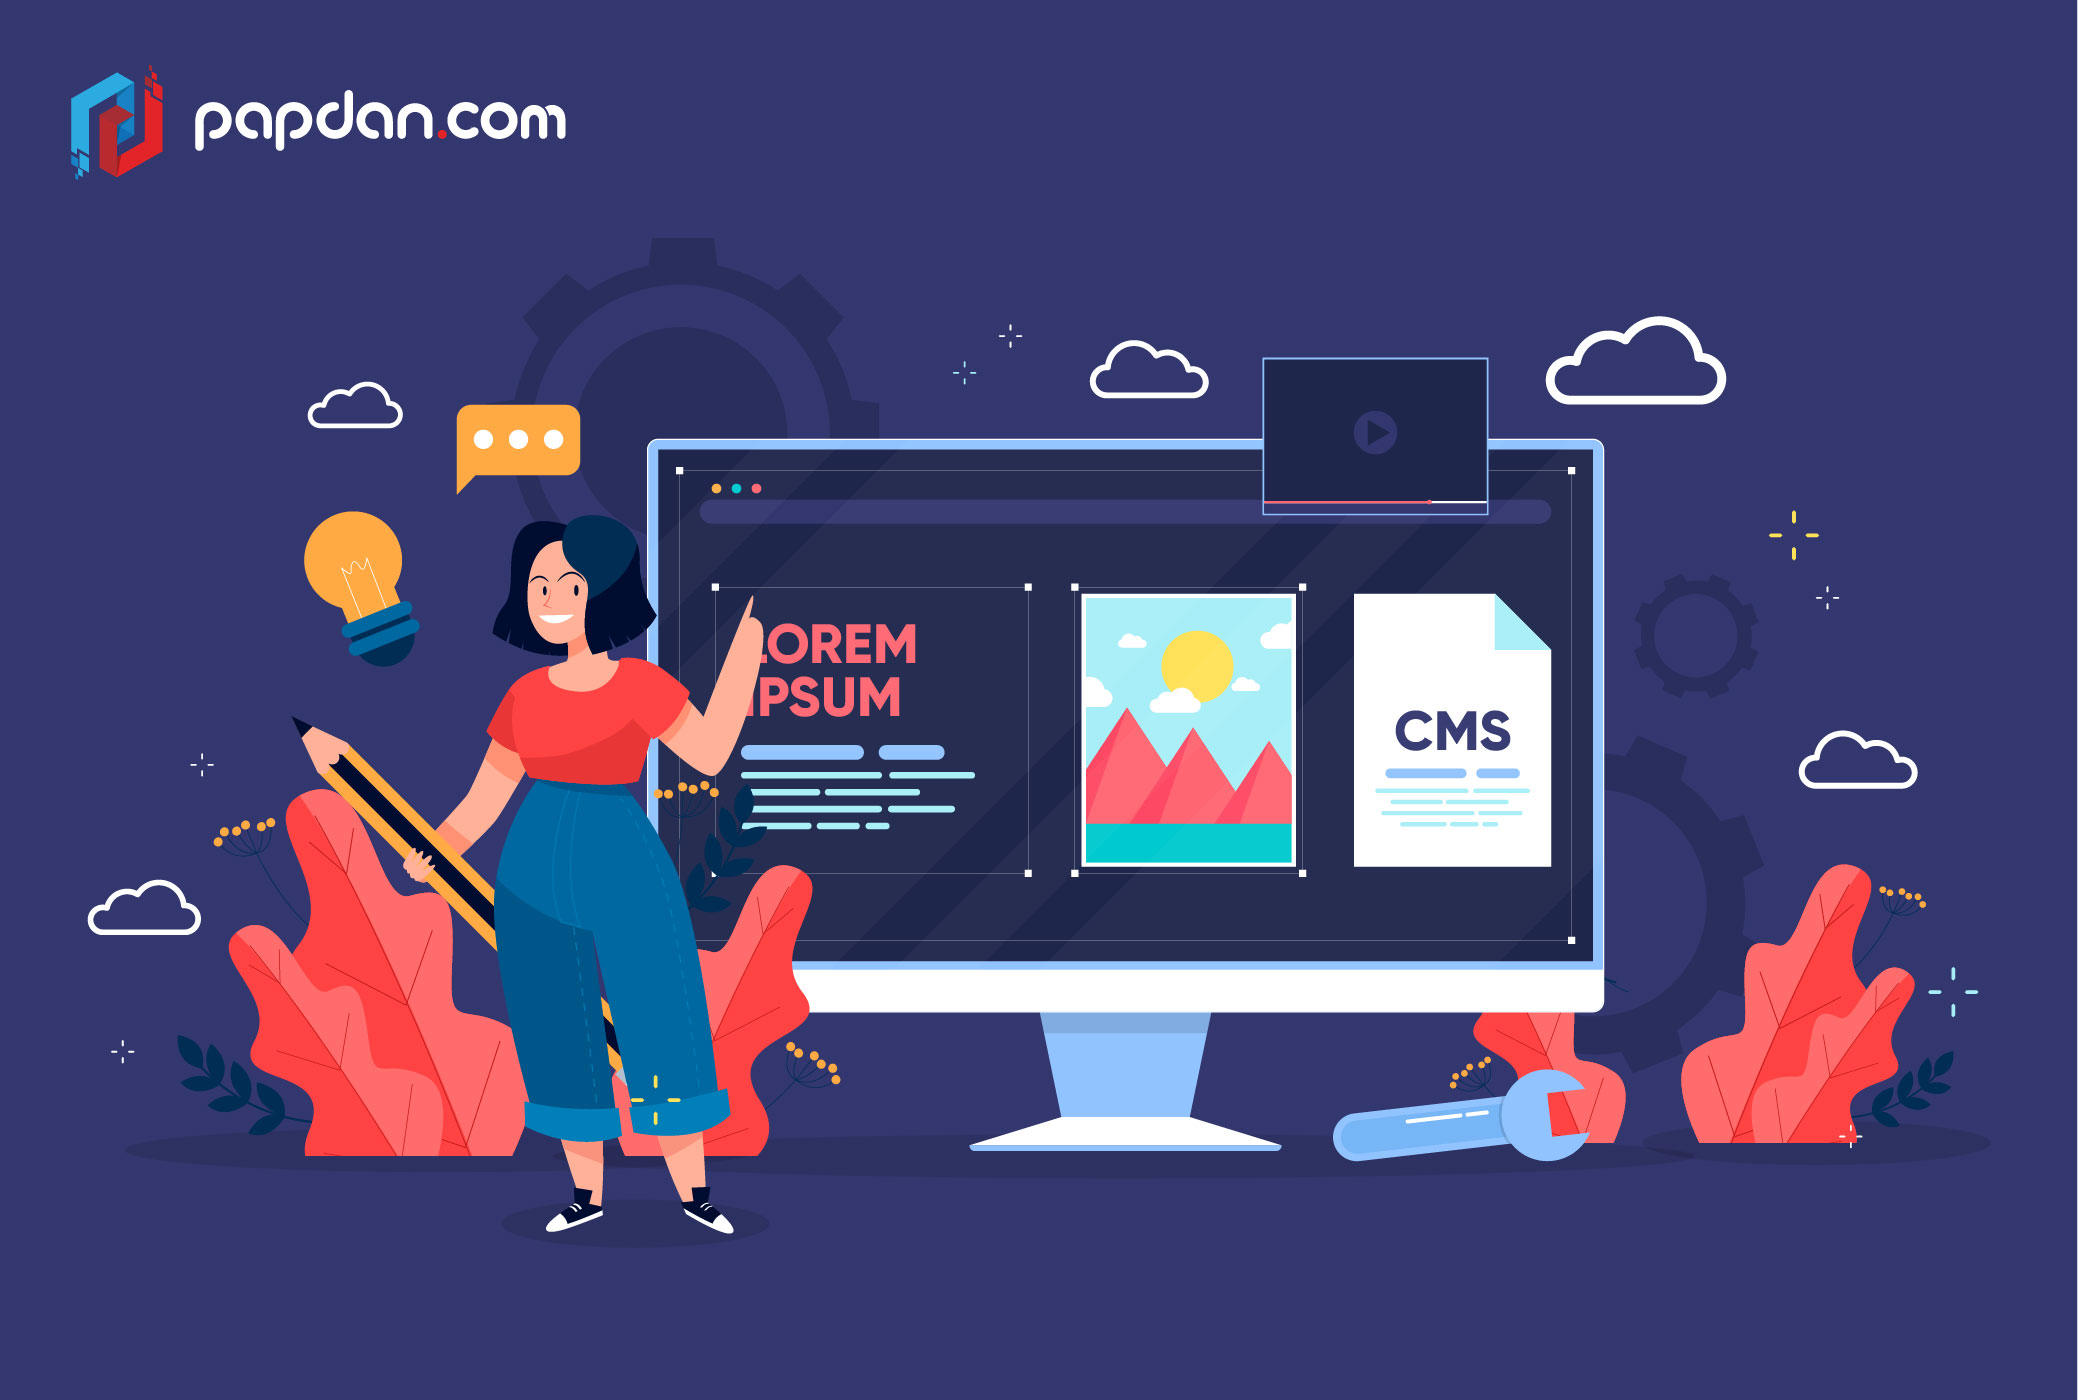 5 Trends in Web Design for 2021